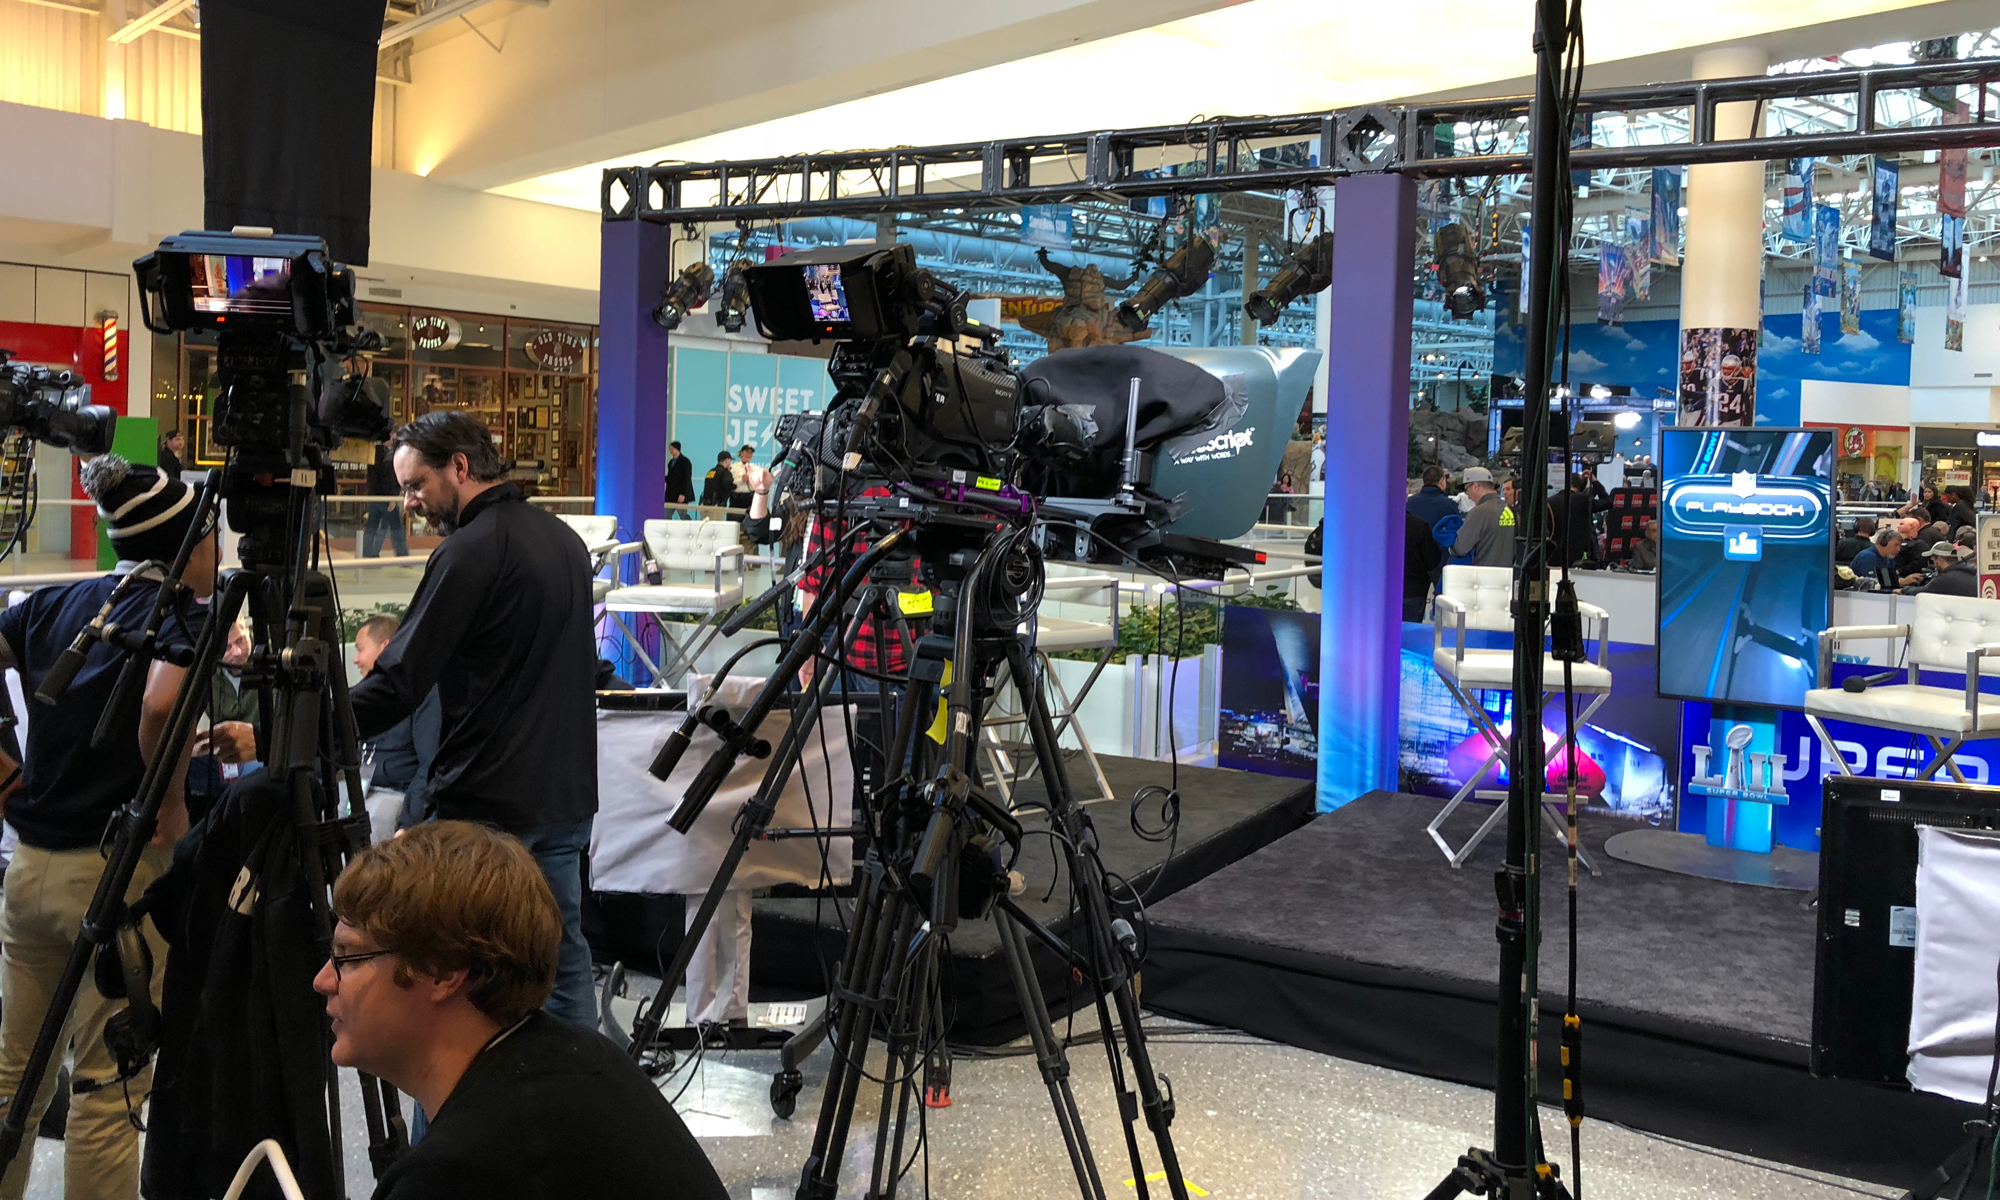 Live From Super Bowl LII With 16 Setups in Seven Locations, NFL Network Aims To Capture All of Chilly Minneapolis